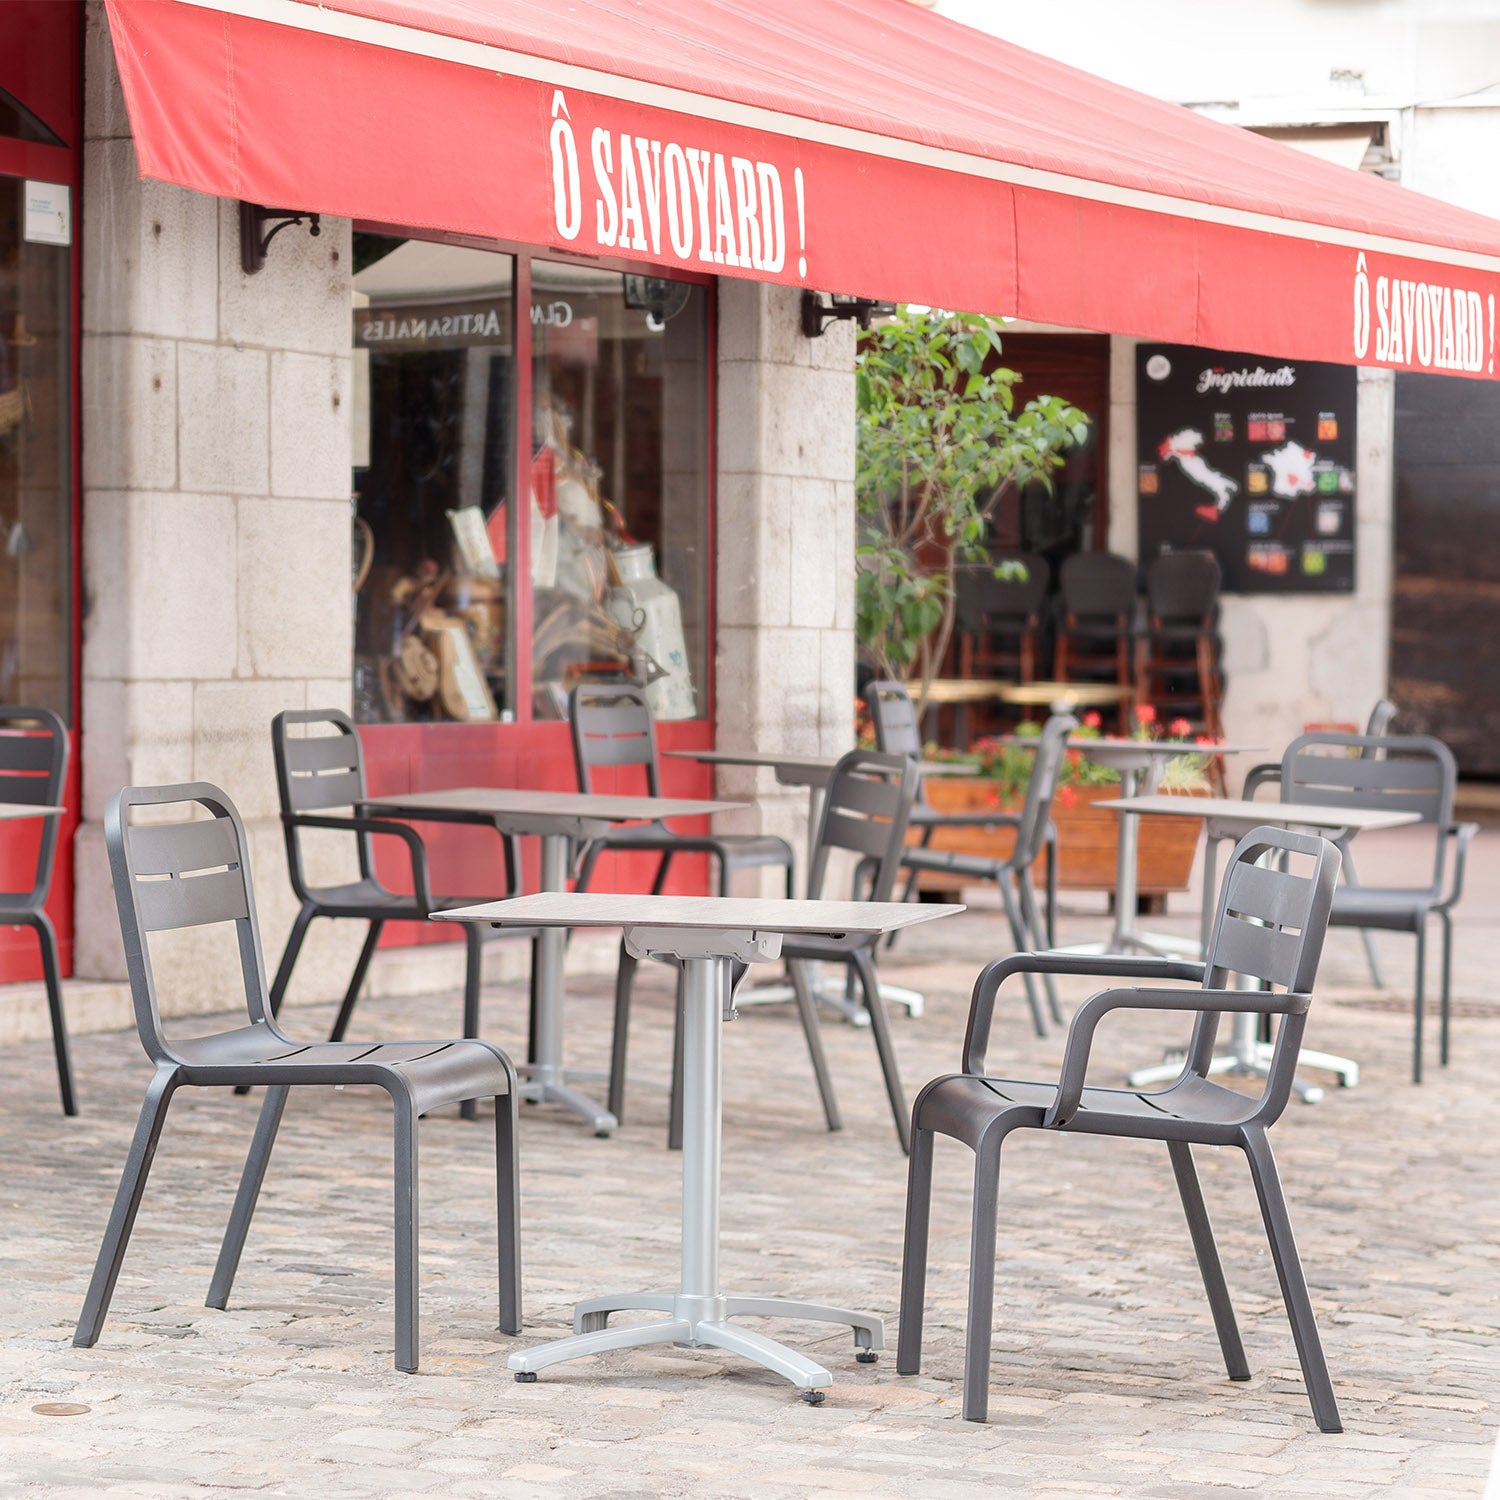 Spring into Action: Tips for Getting Your Restaurant Ready for Outdoor Dining